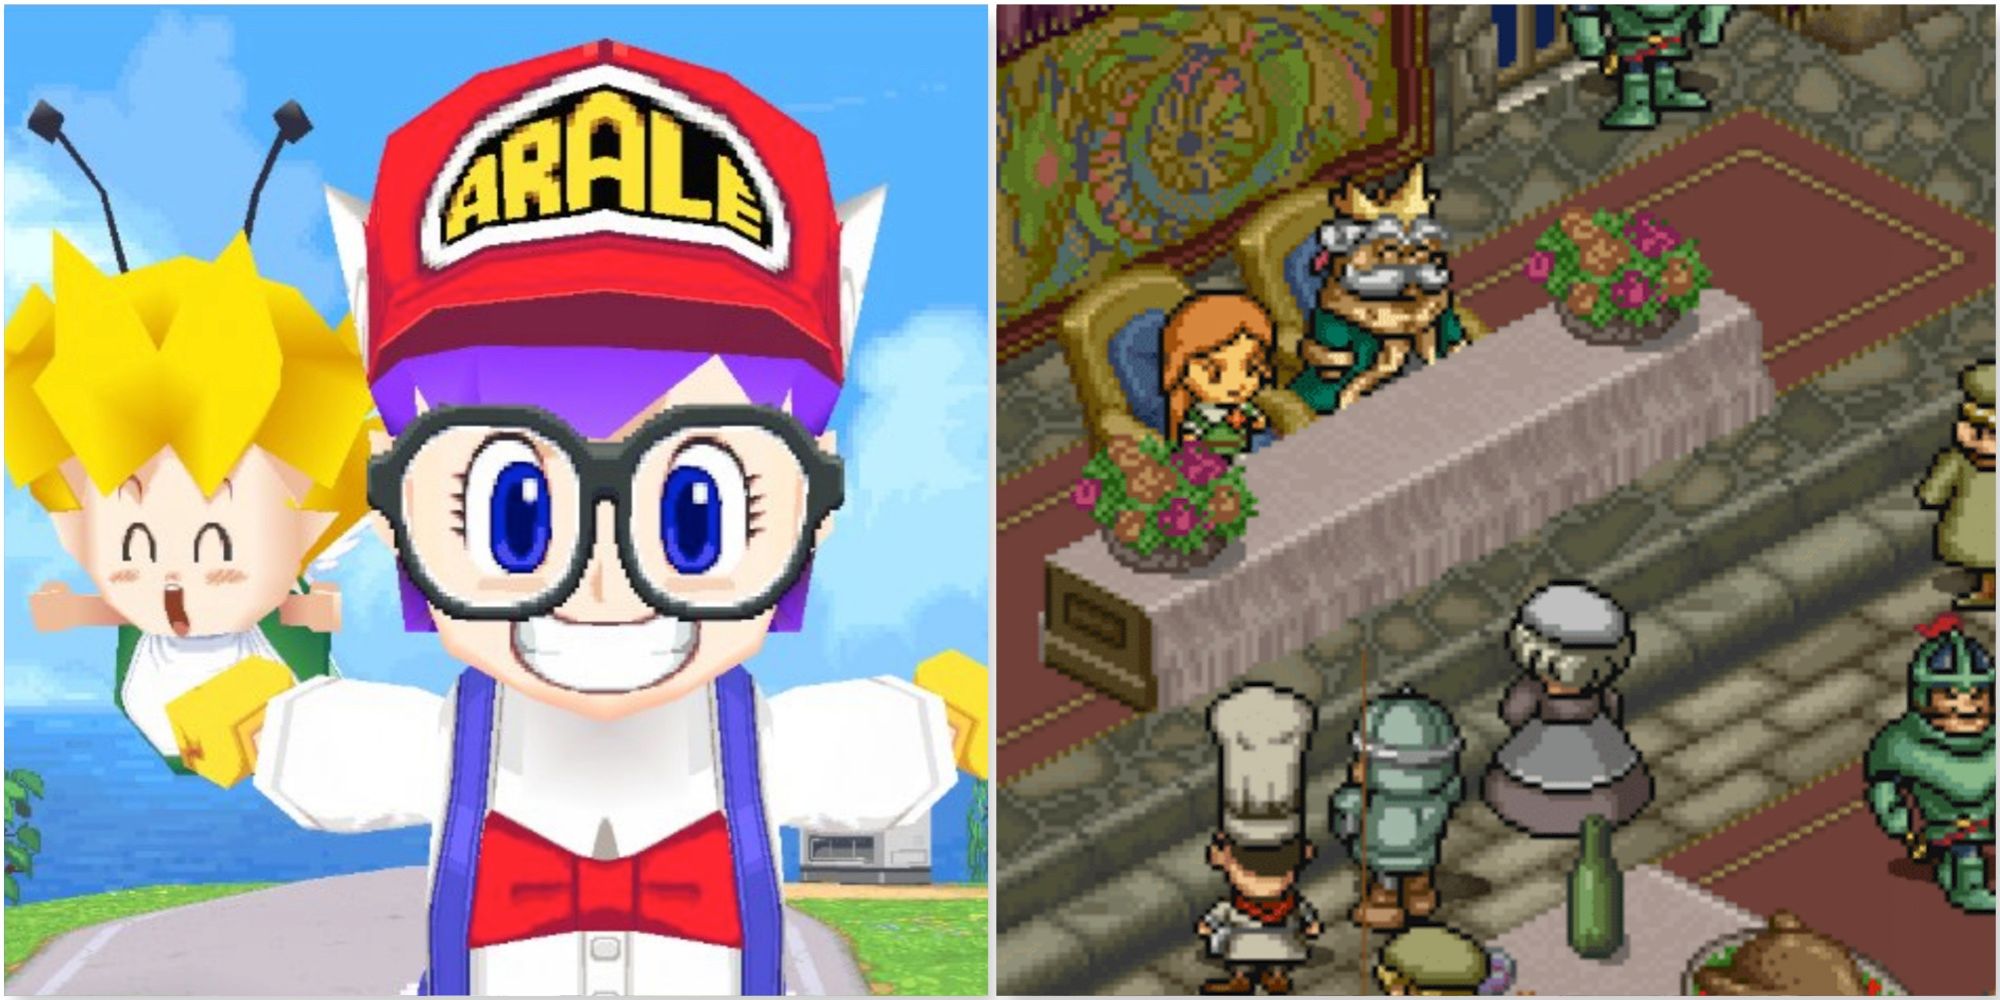 Gatchan and Arale in Dr. Slump and A cutscene featuring characters in Popolocrois Monogatari